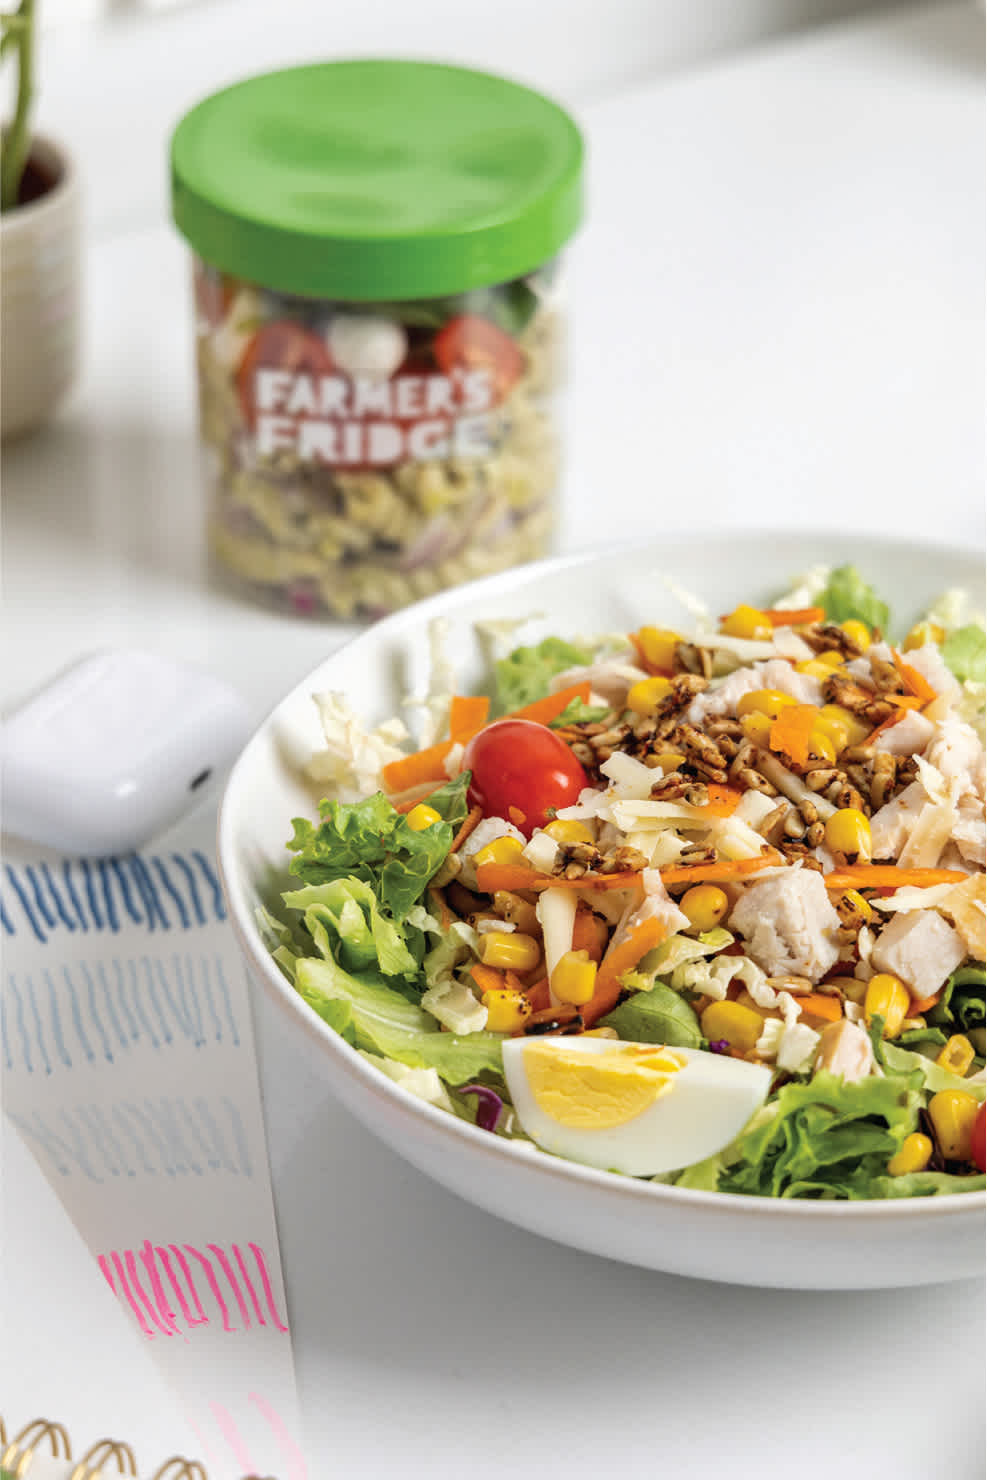 Image of a salad and a jar sitting on a desk